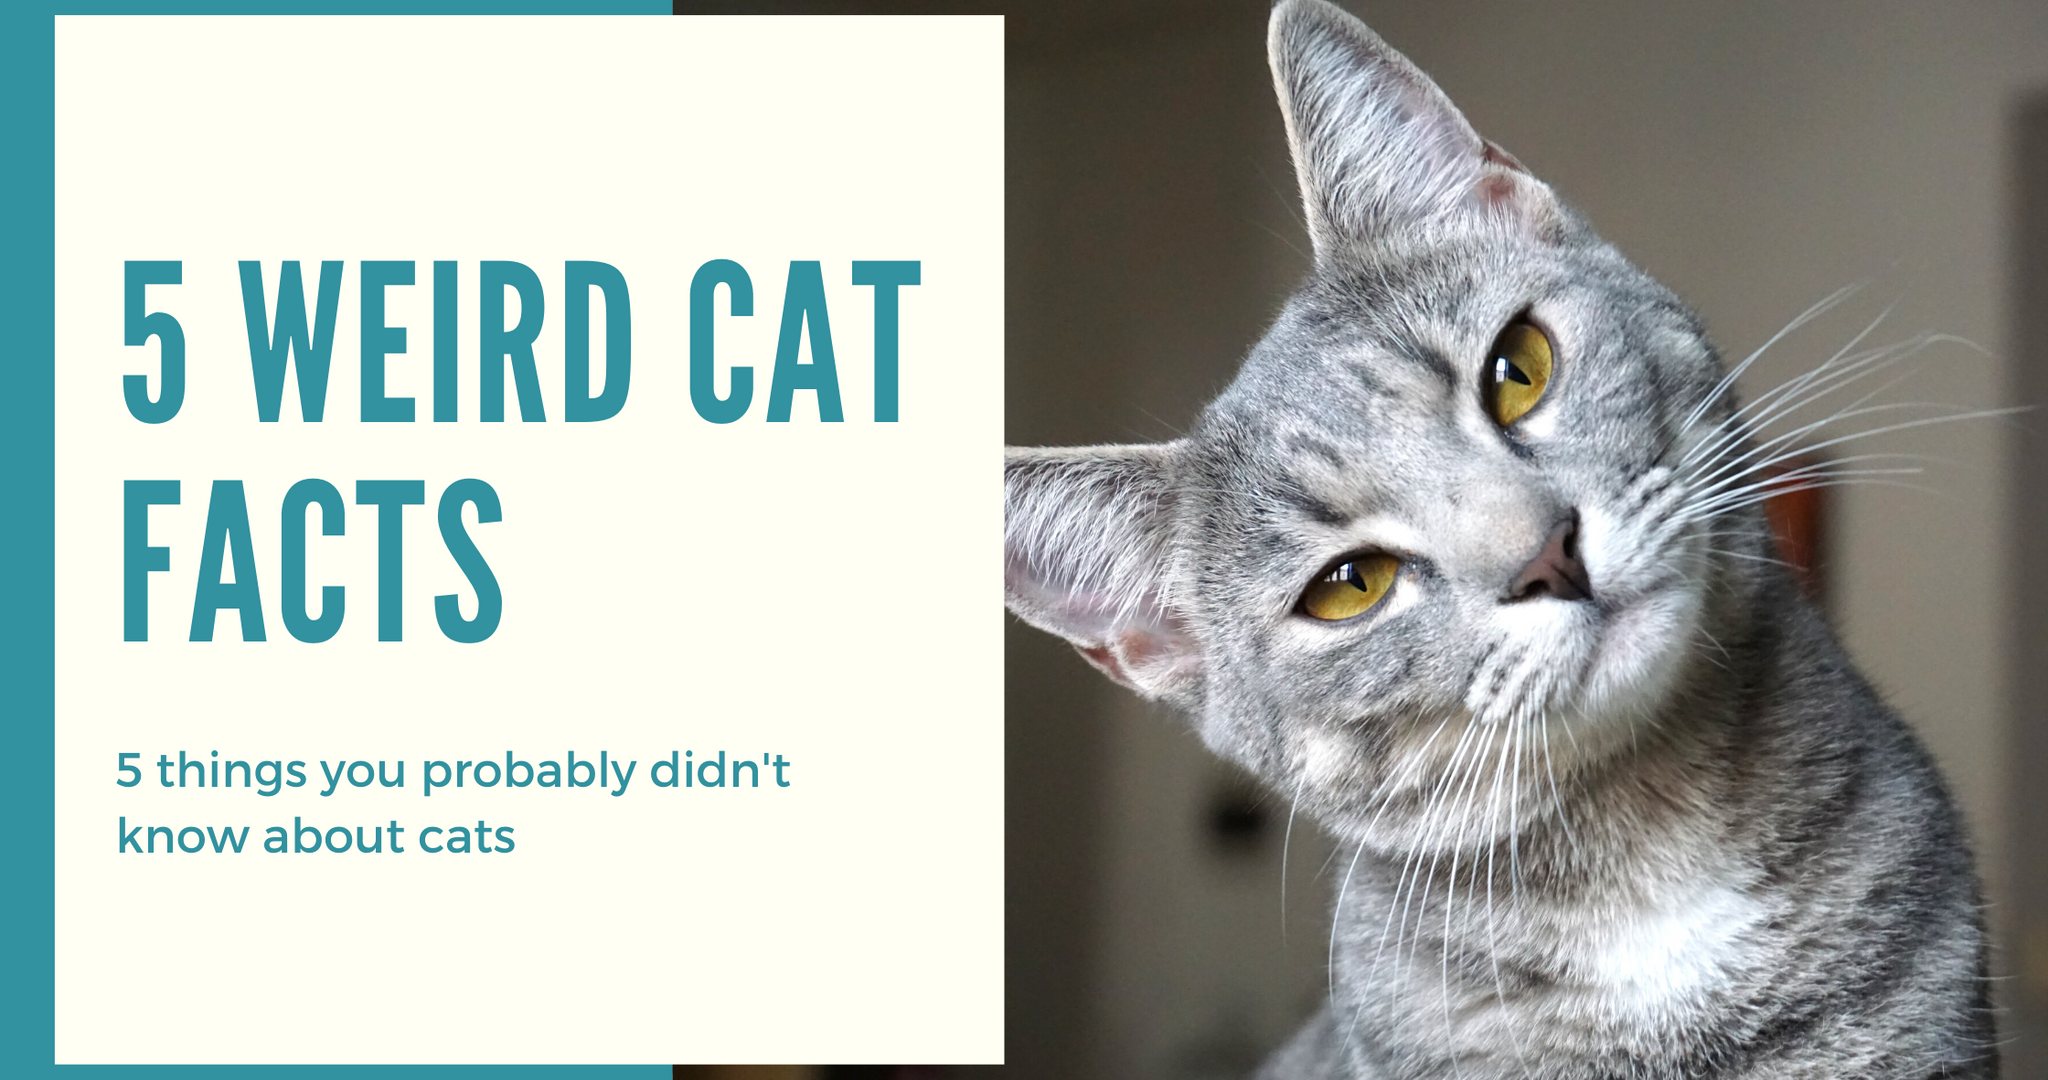 5 things you don’t know about cats